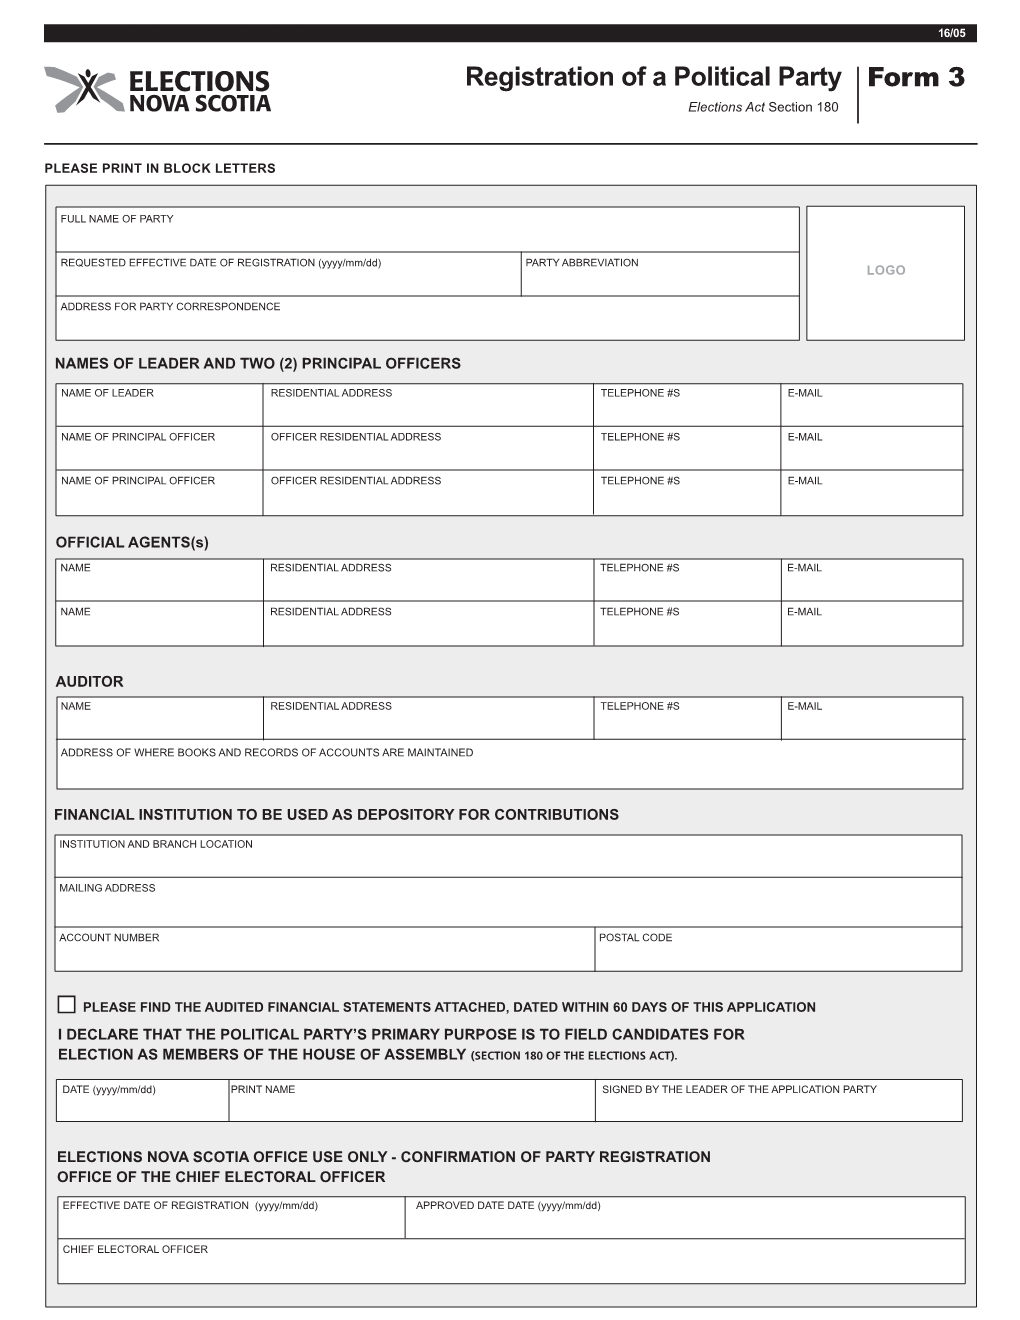 Form 3 Registration of a Political Party